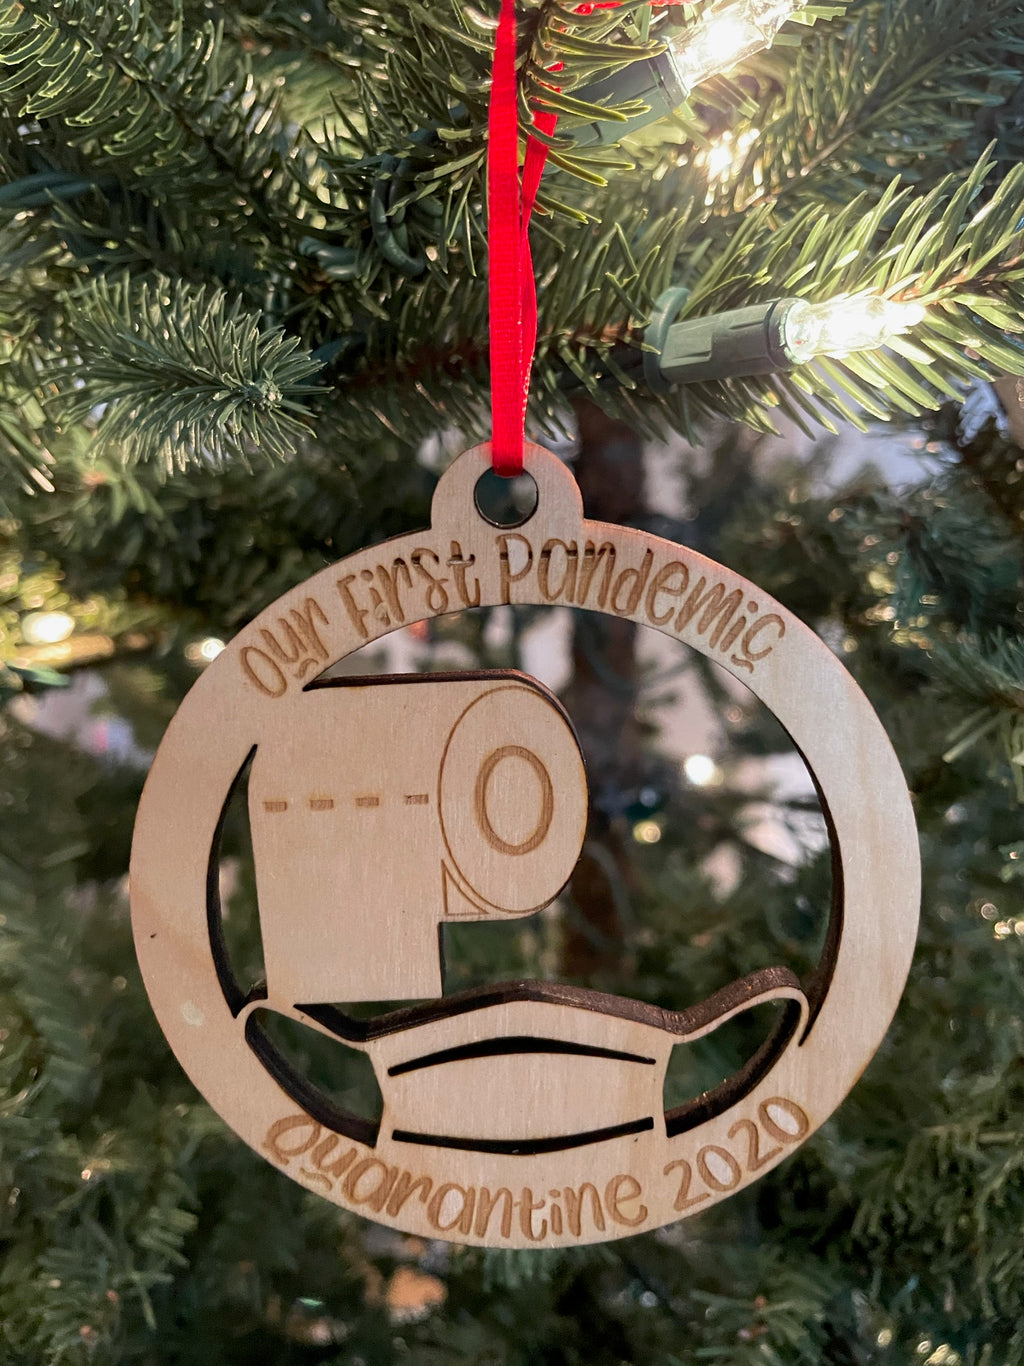 Our First Pandemic Quarantine Laser Cut Wooden Ornament